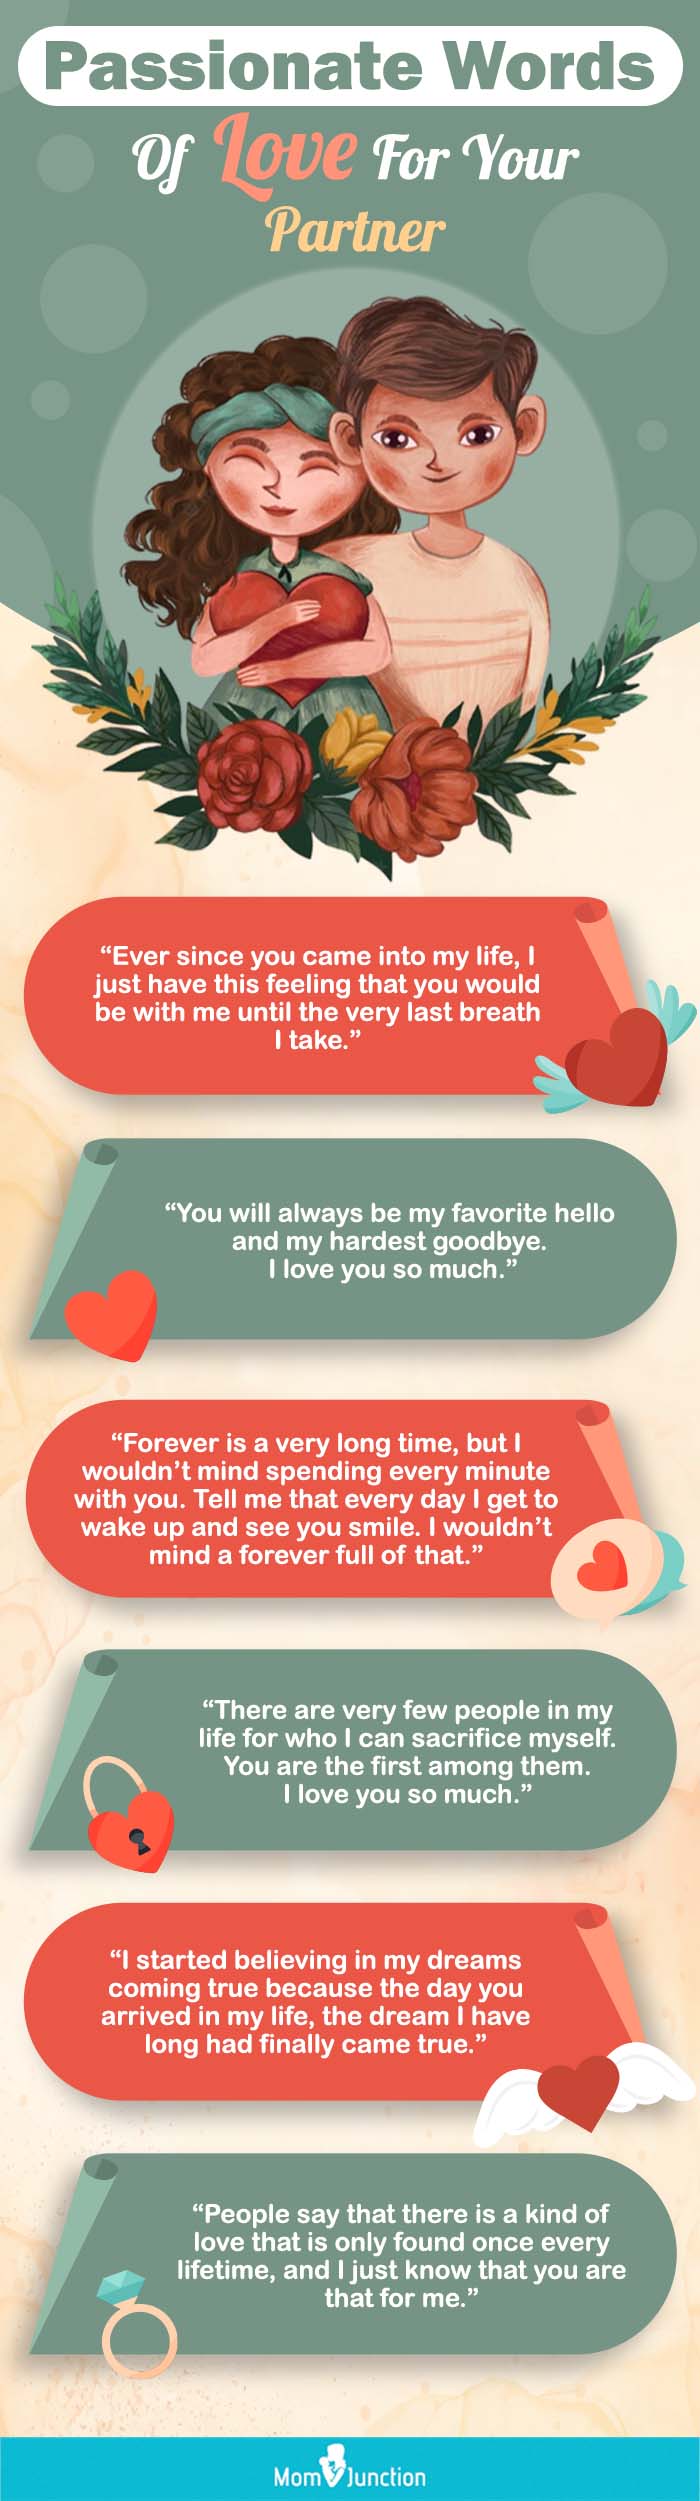 passionate words of love for your partner (infographic)